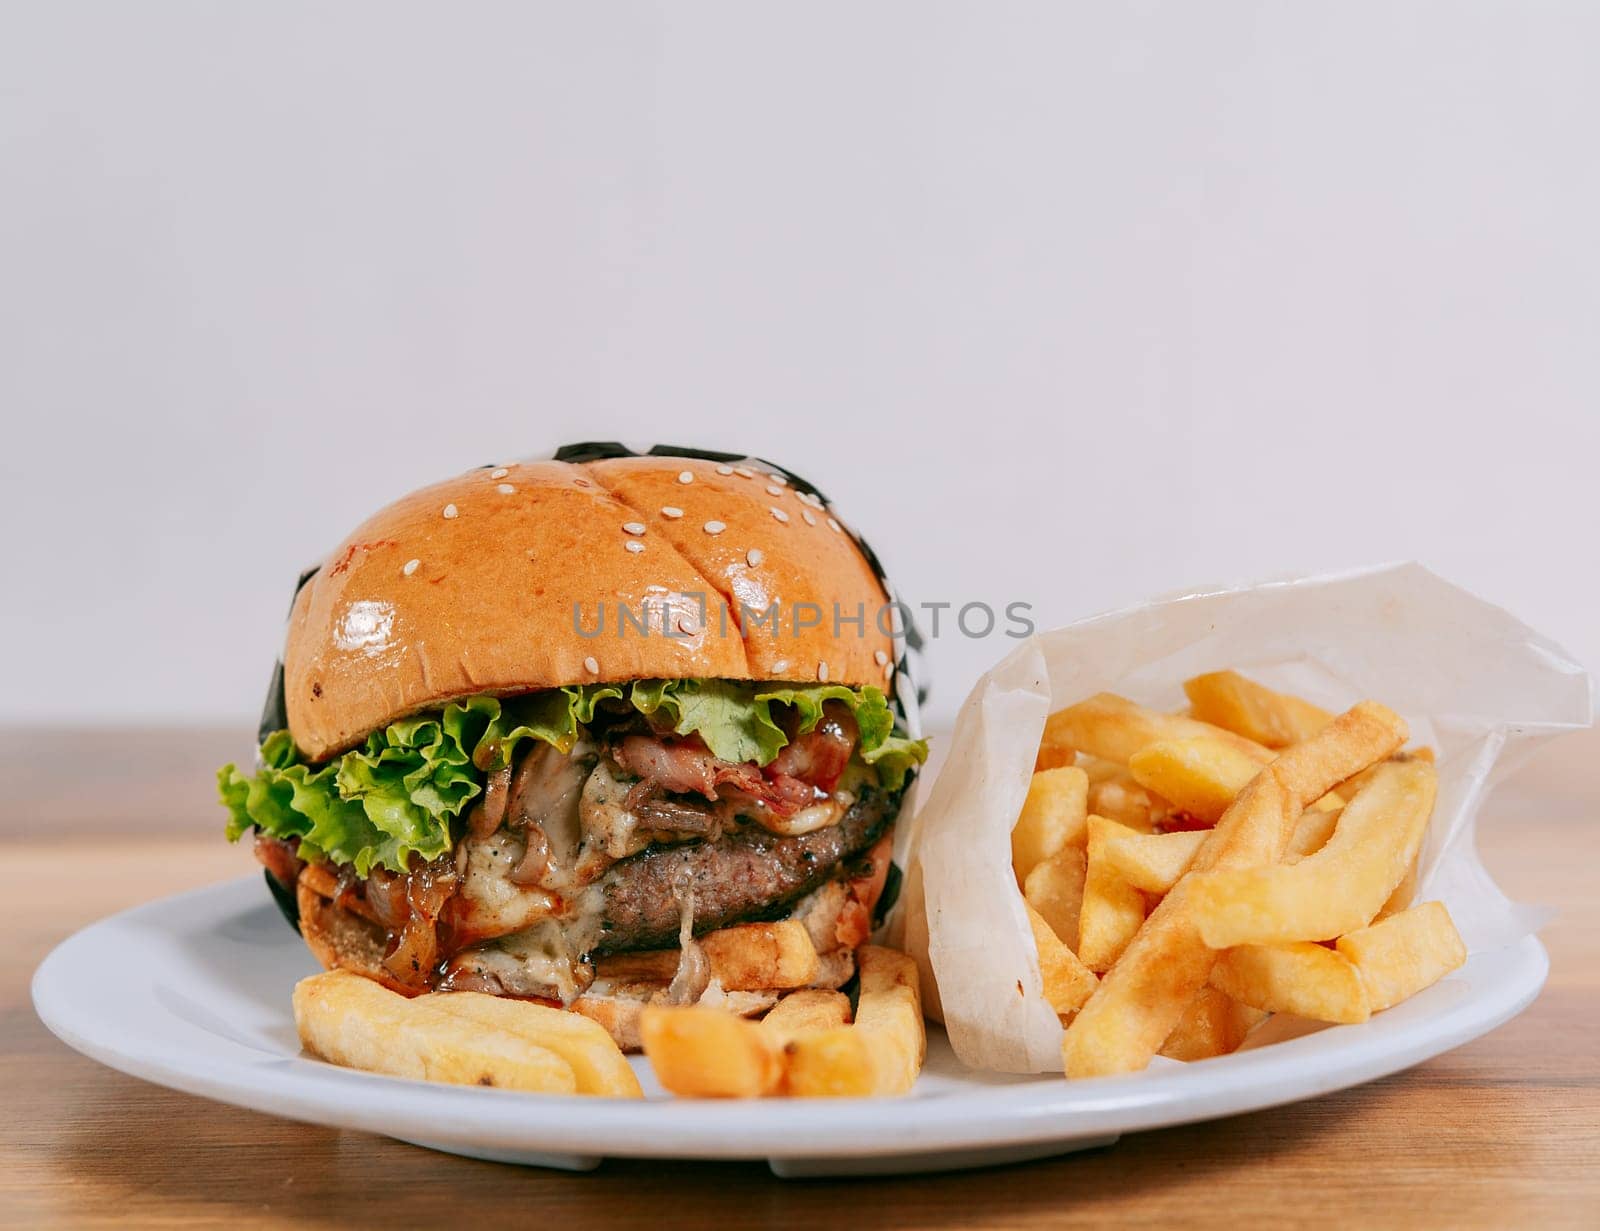 Close up of a delicious hamburger with french fries on wooden table with copy space. Cheeseburger with fries on wooden table